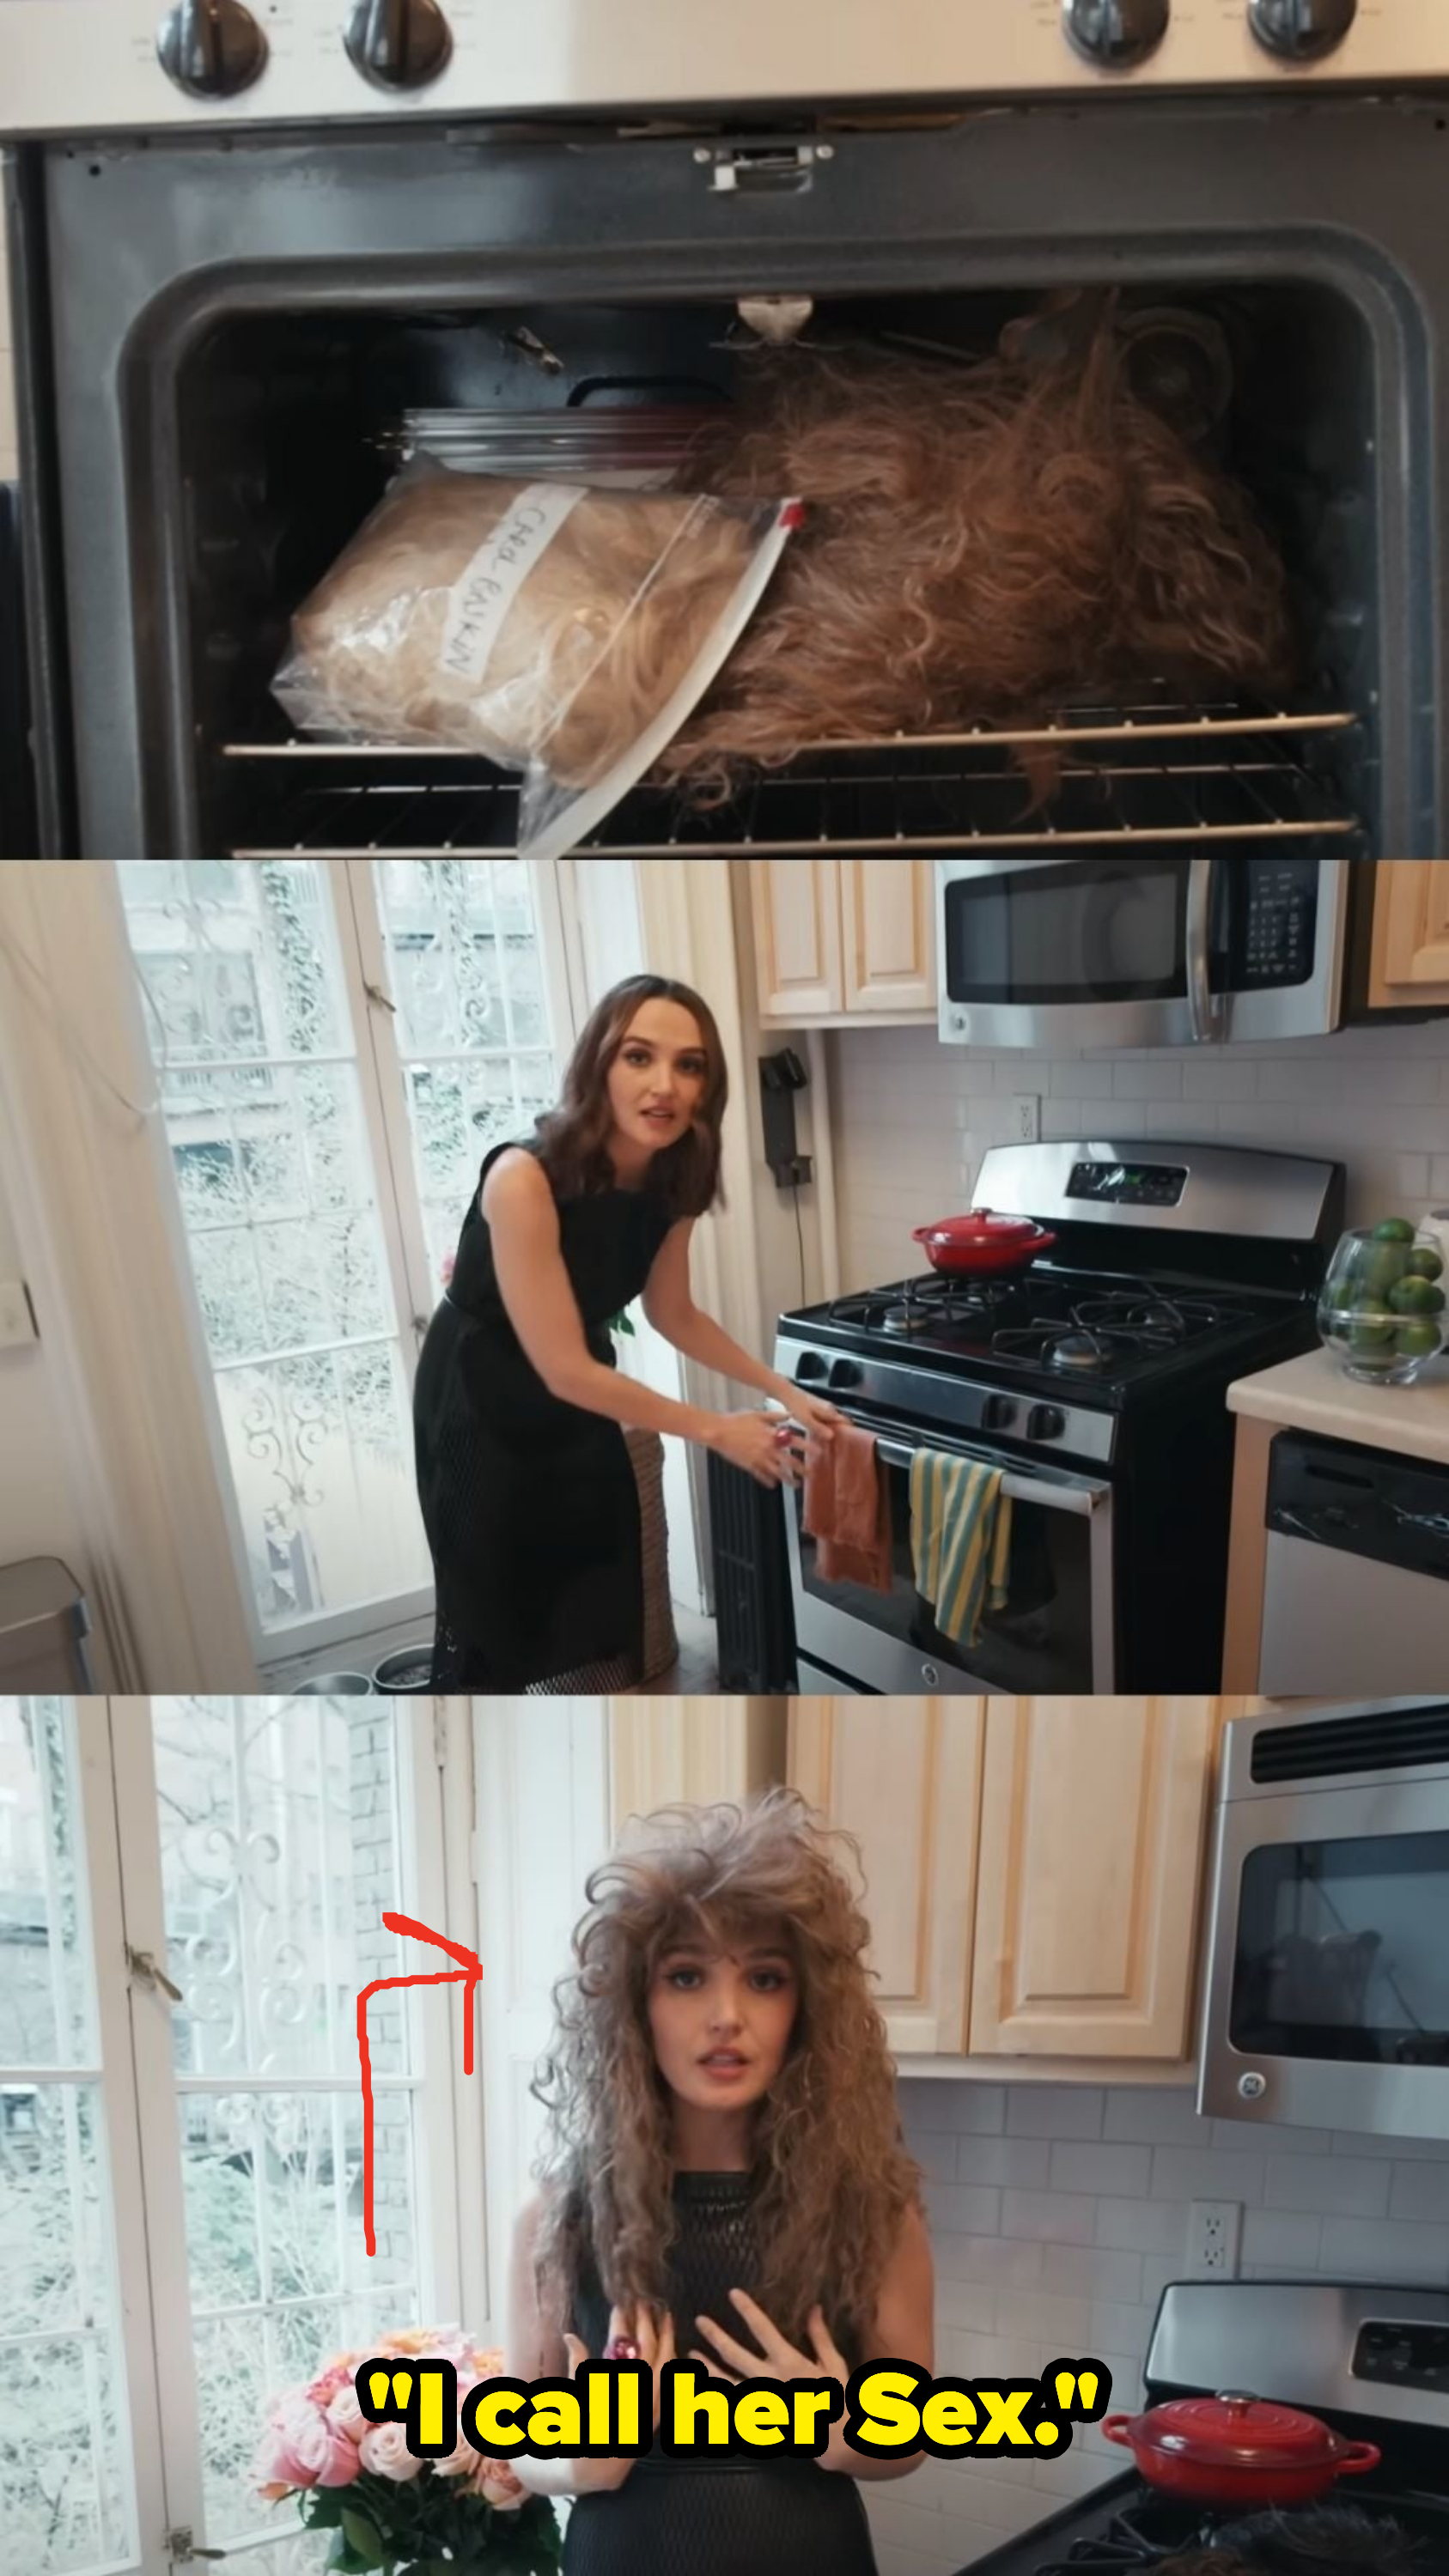 Chloe showing AD that she keeps her wigs in her oven